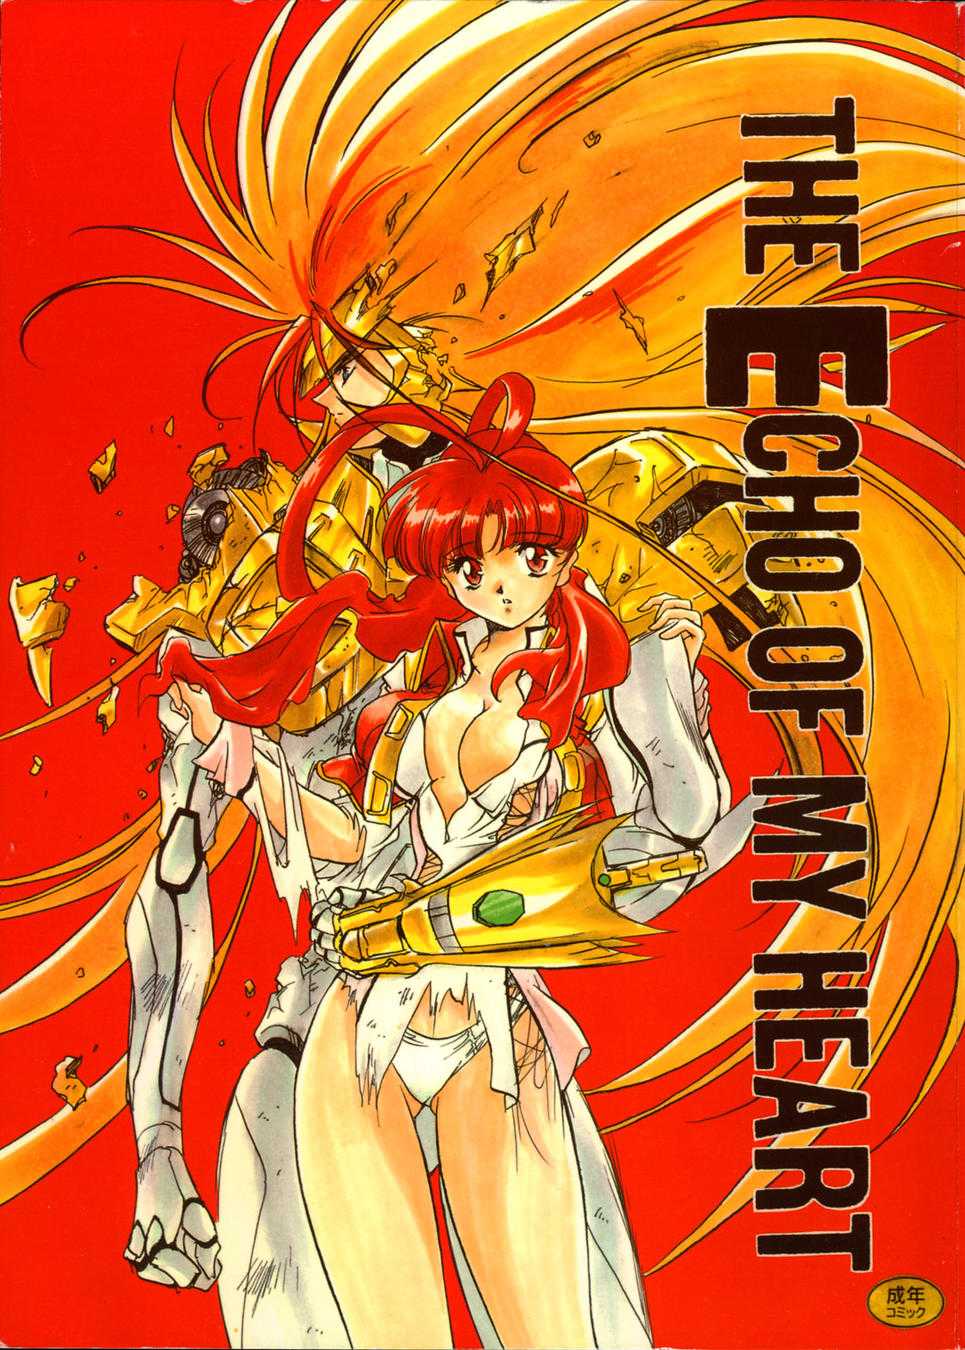 [M-10 &amp; RED DRAGON] THE ECHO OF MY HEART (King of Braves GaoGaiGar) [M-10 &amp; RED DRAGON] THE ECHO OF MY HEART (勇者王ガオガイガー)